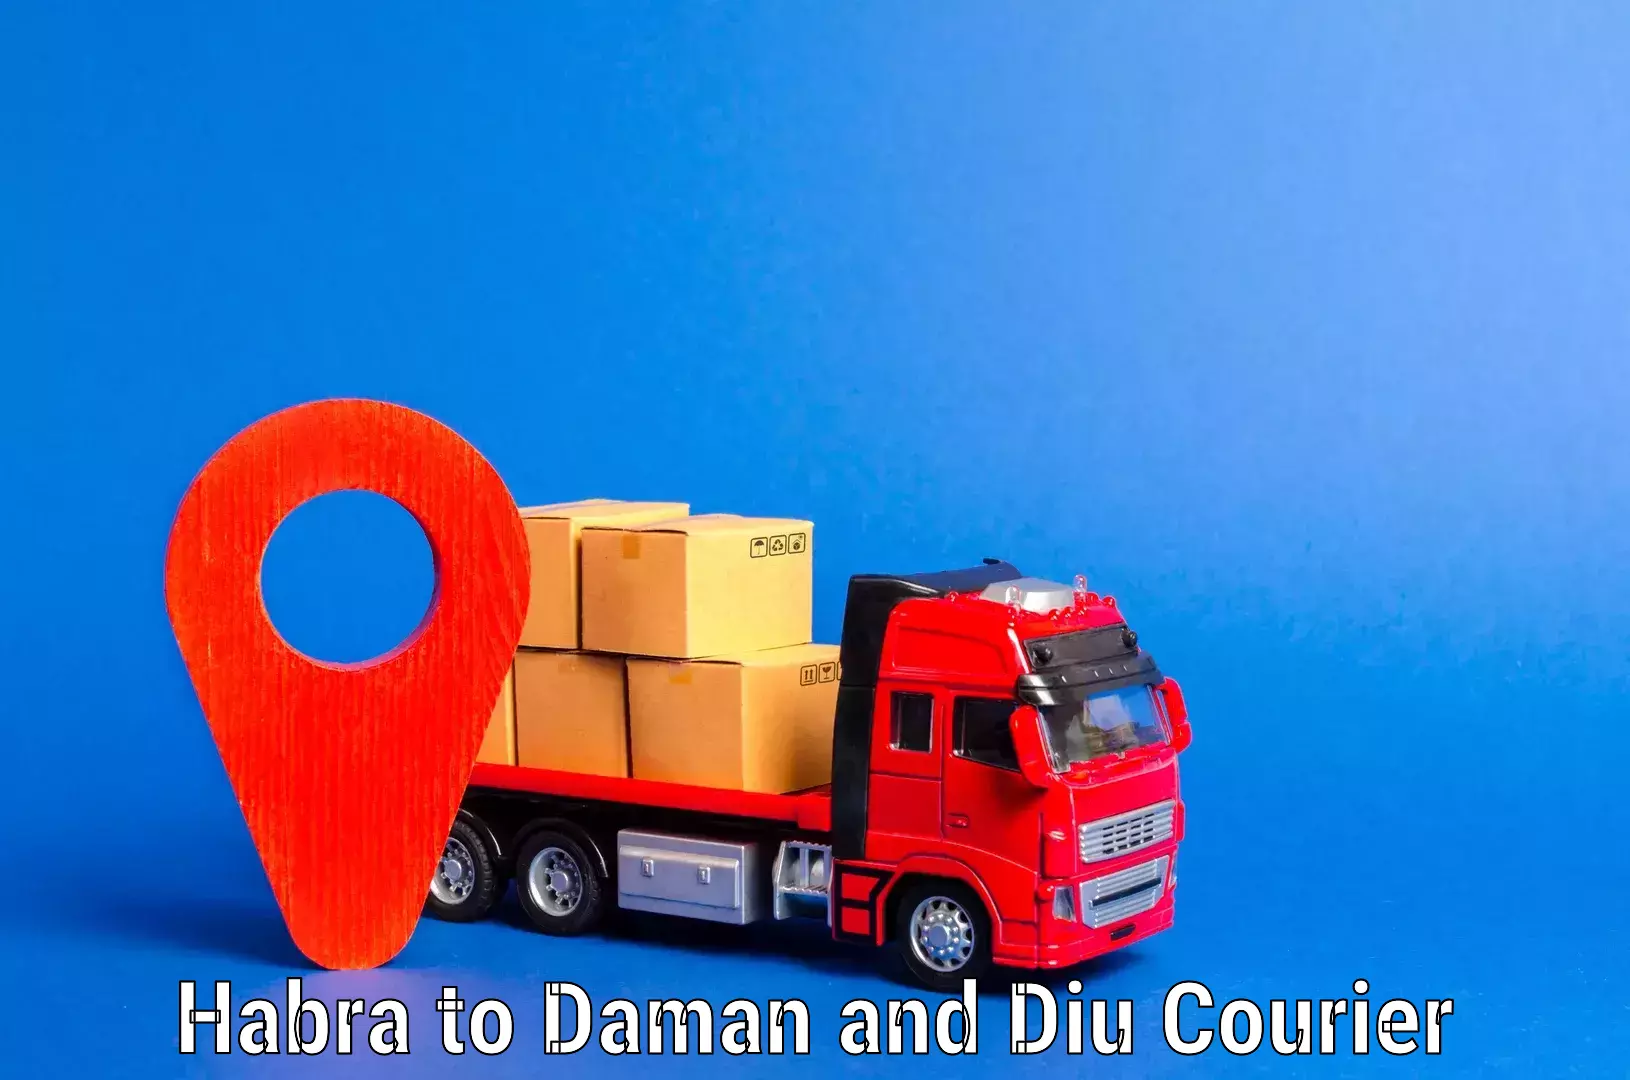 Home moving specialists Habra to Daman and Diu